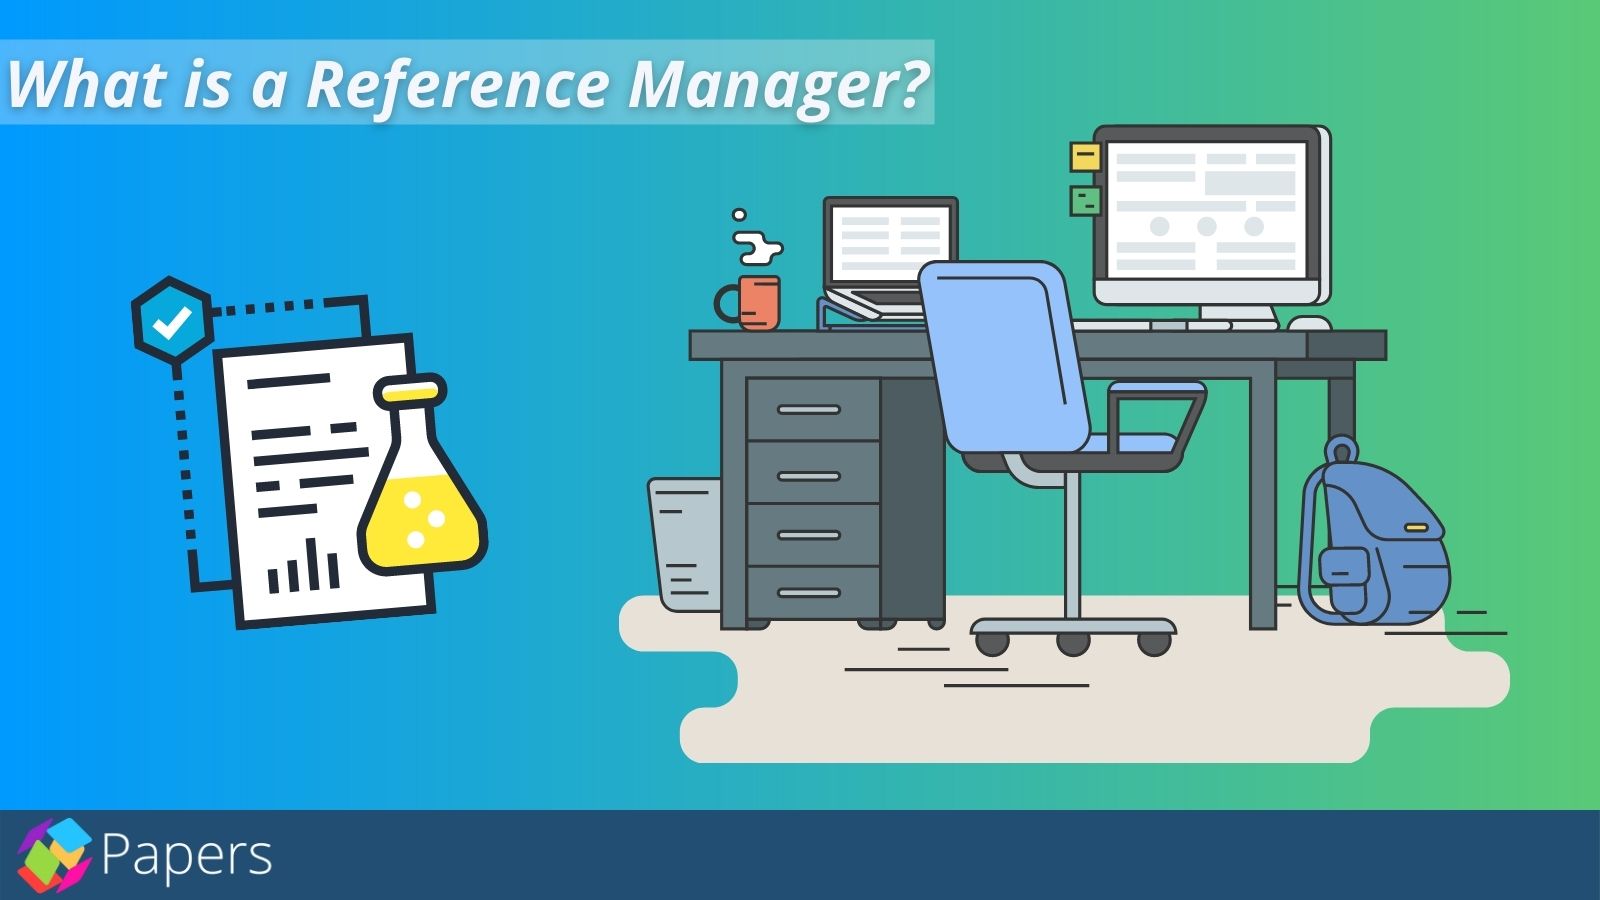 What is a reference manager?